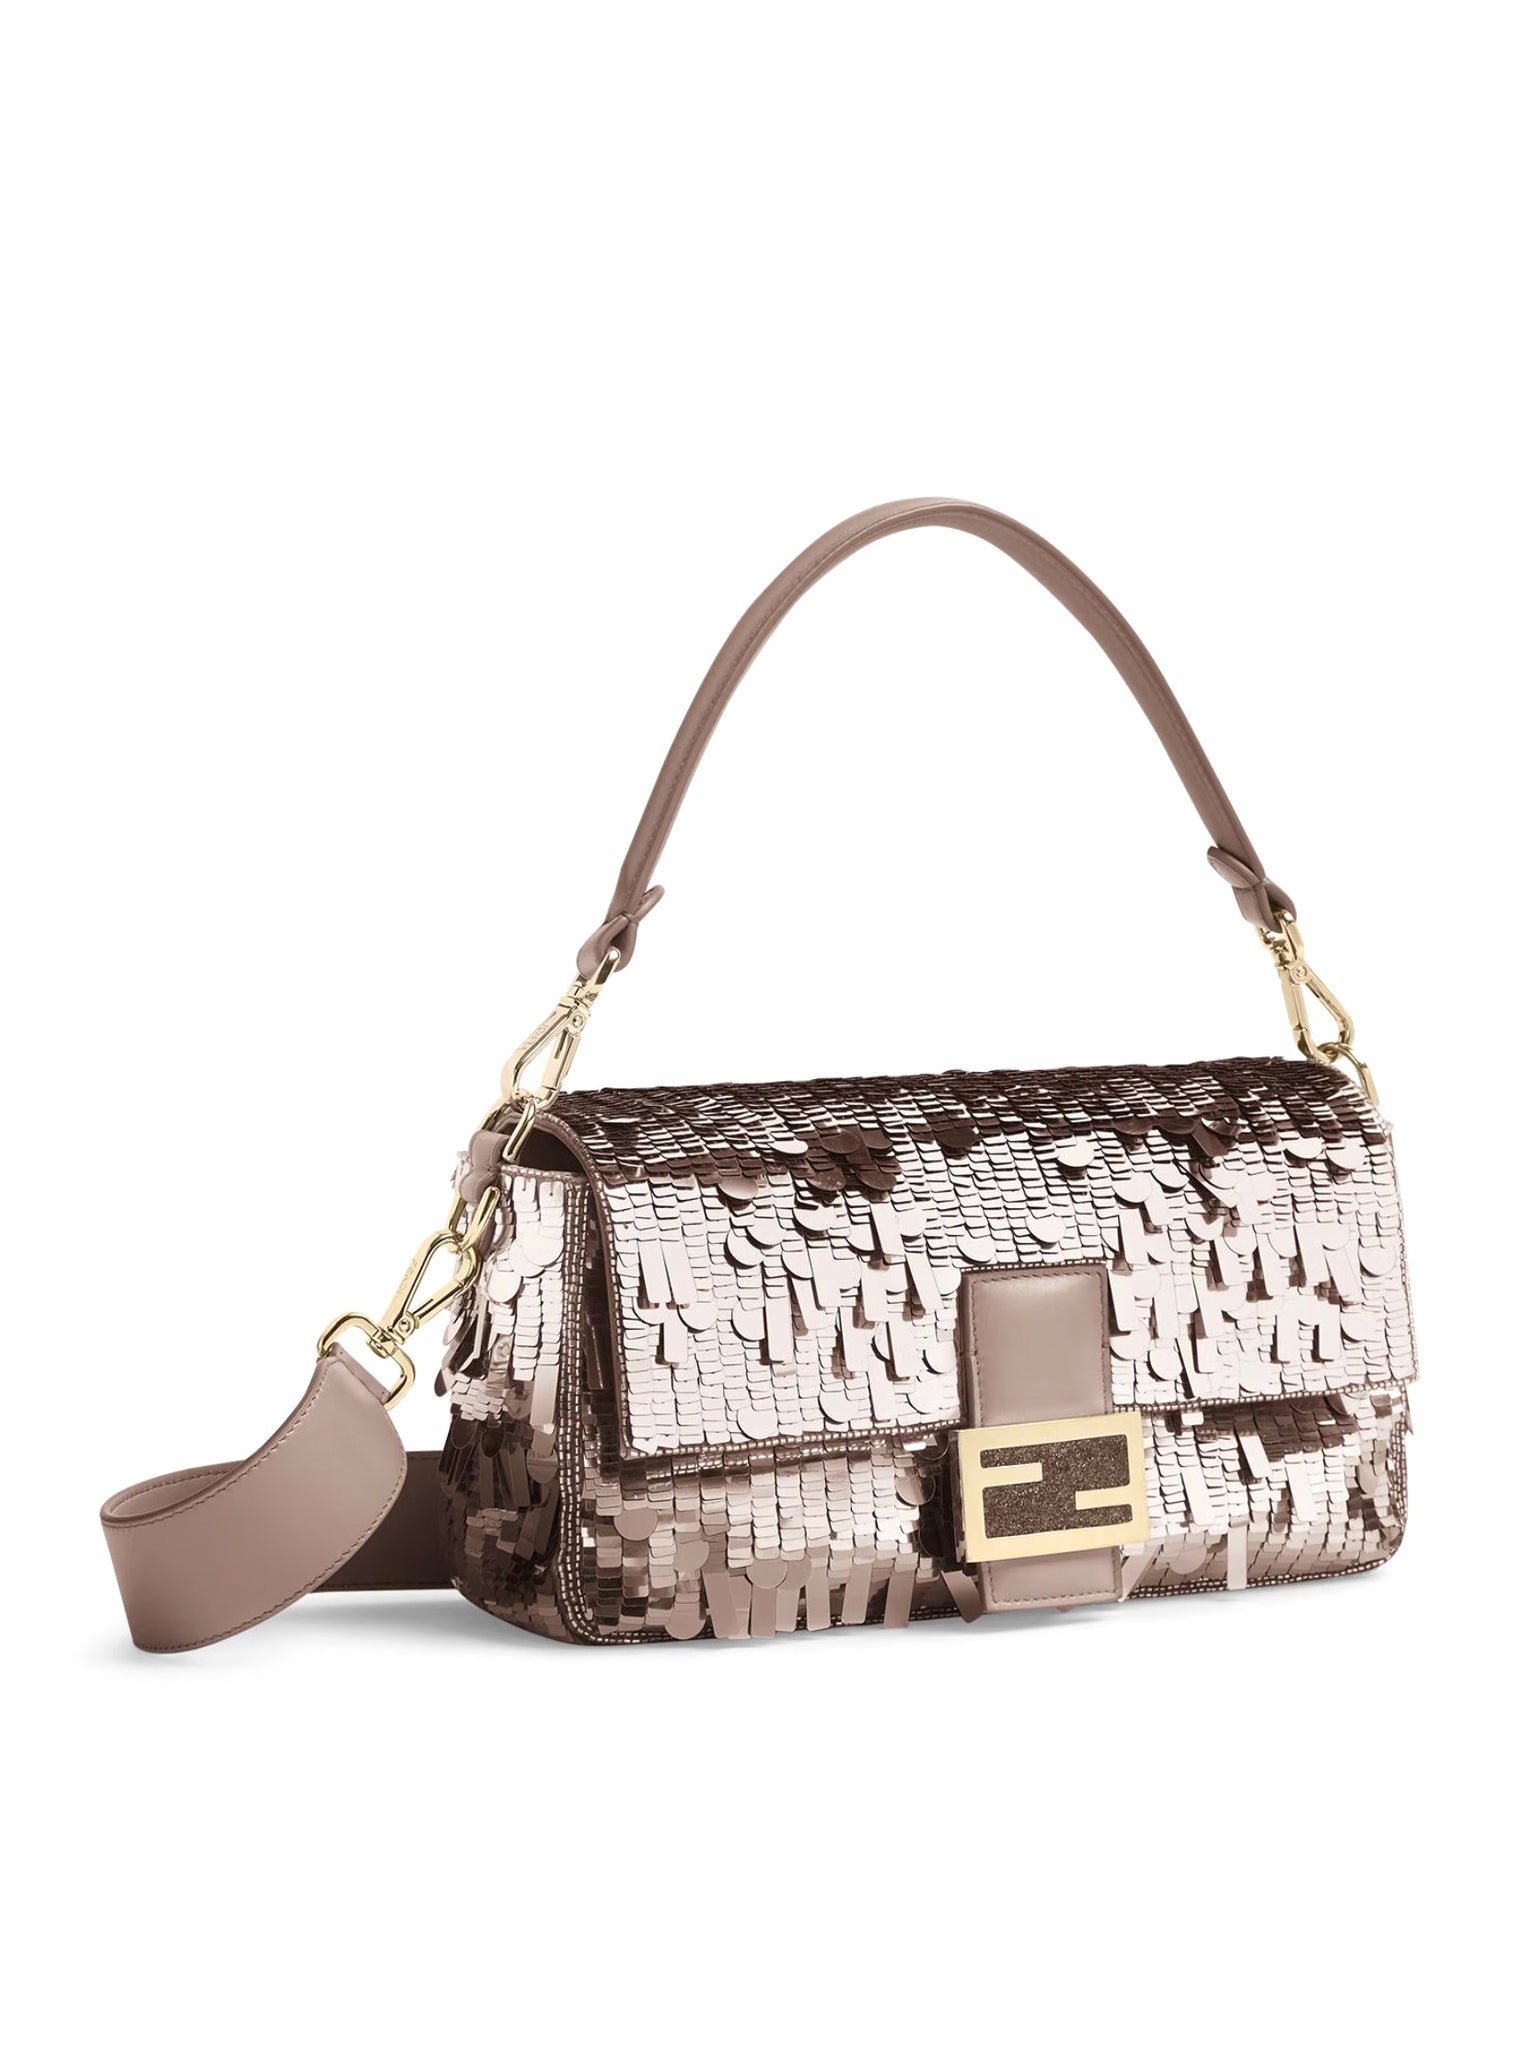 BAGUETTE bag in dove gray leather and sequins